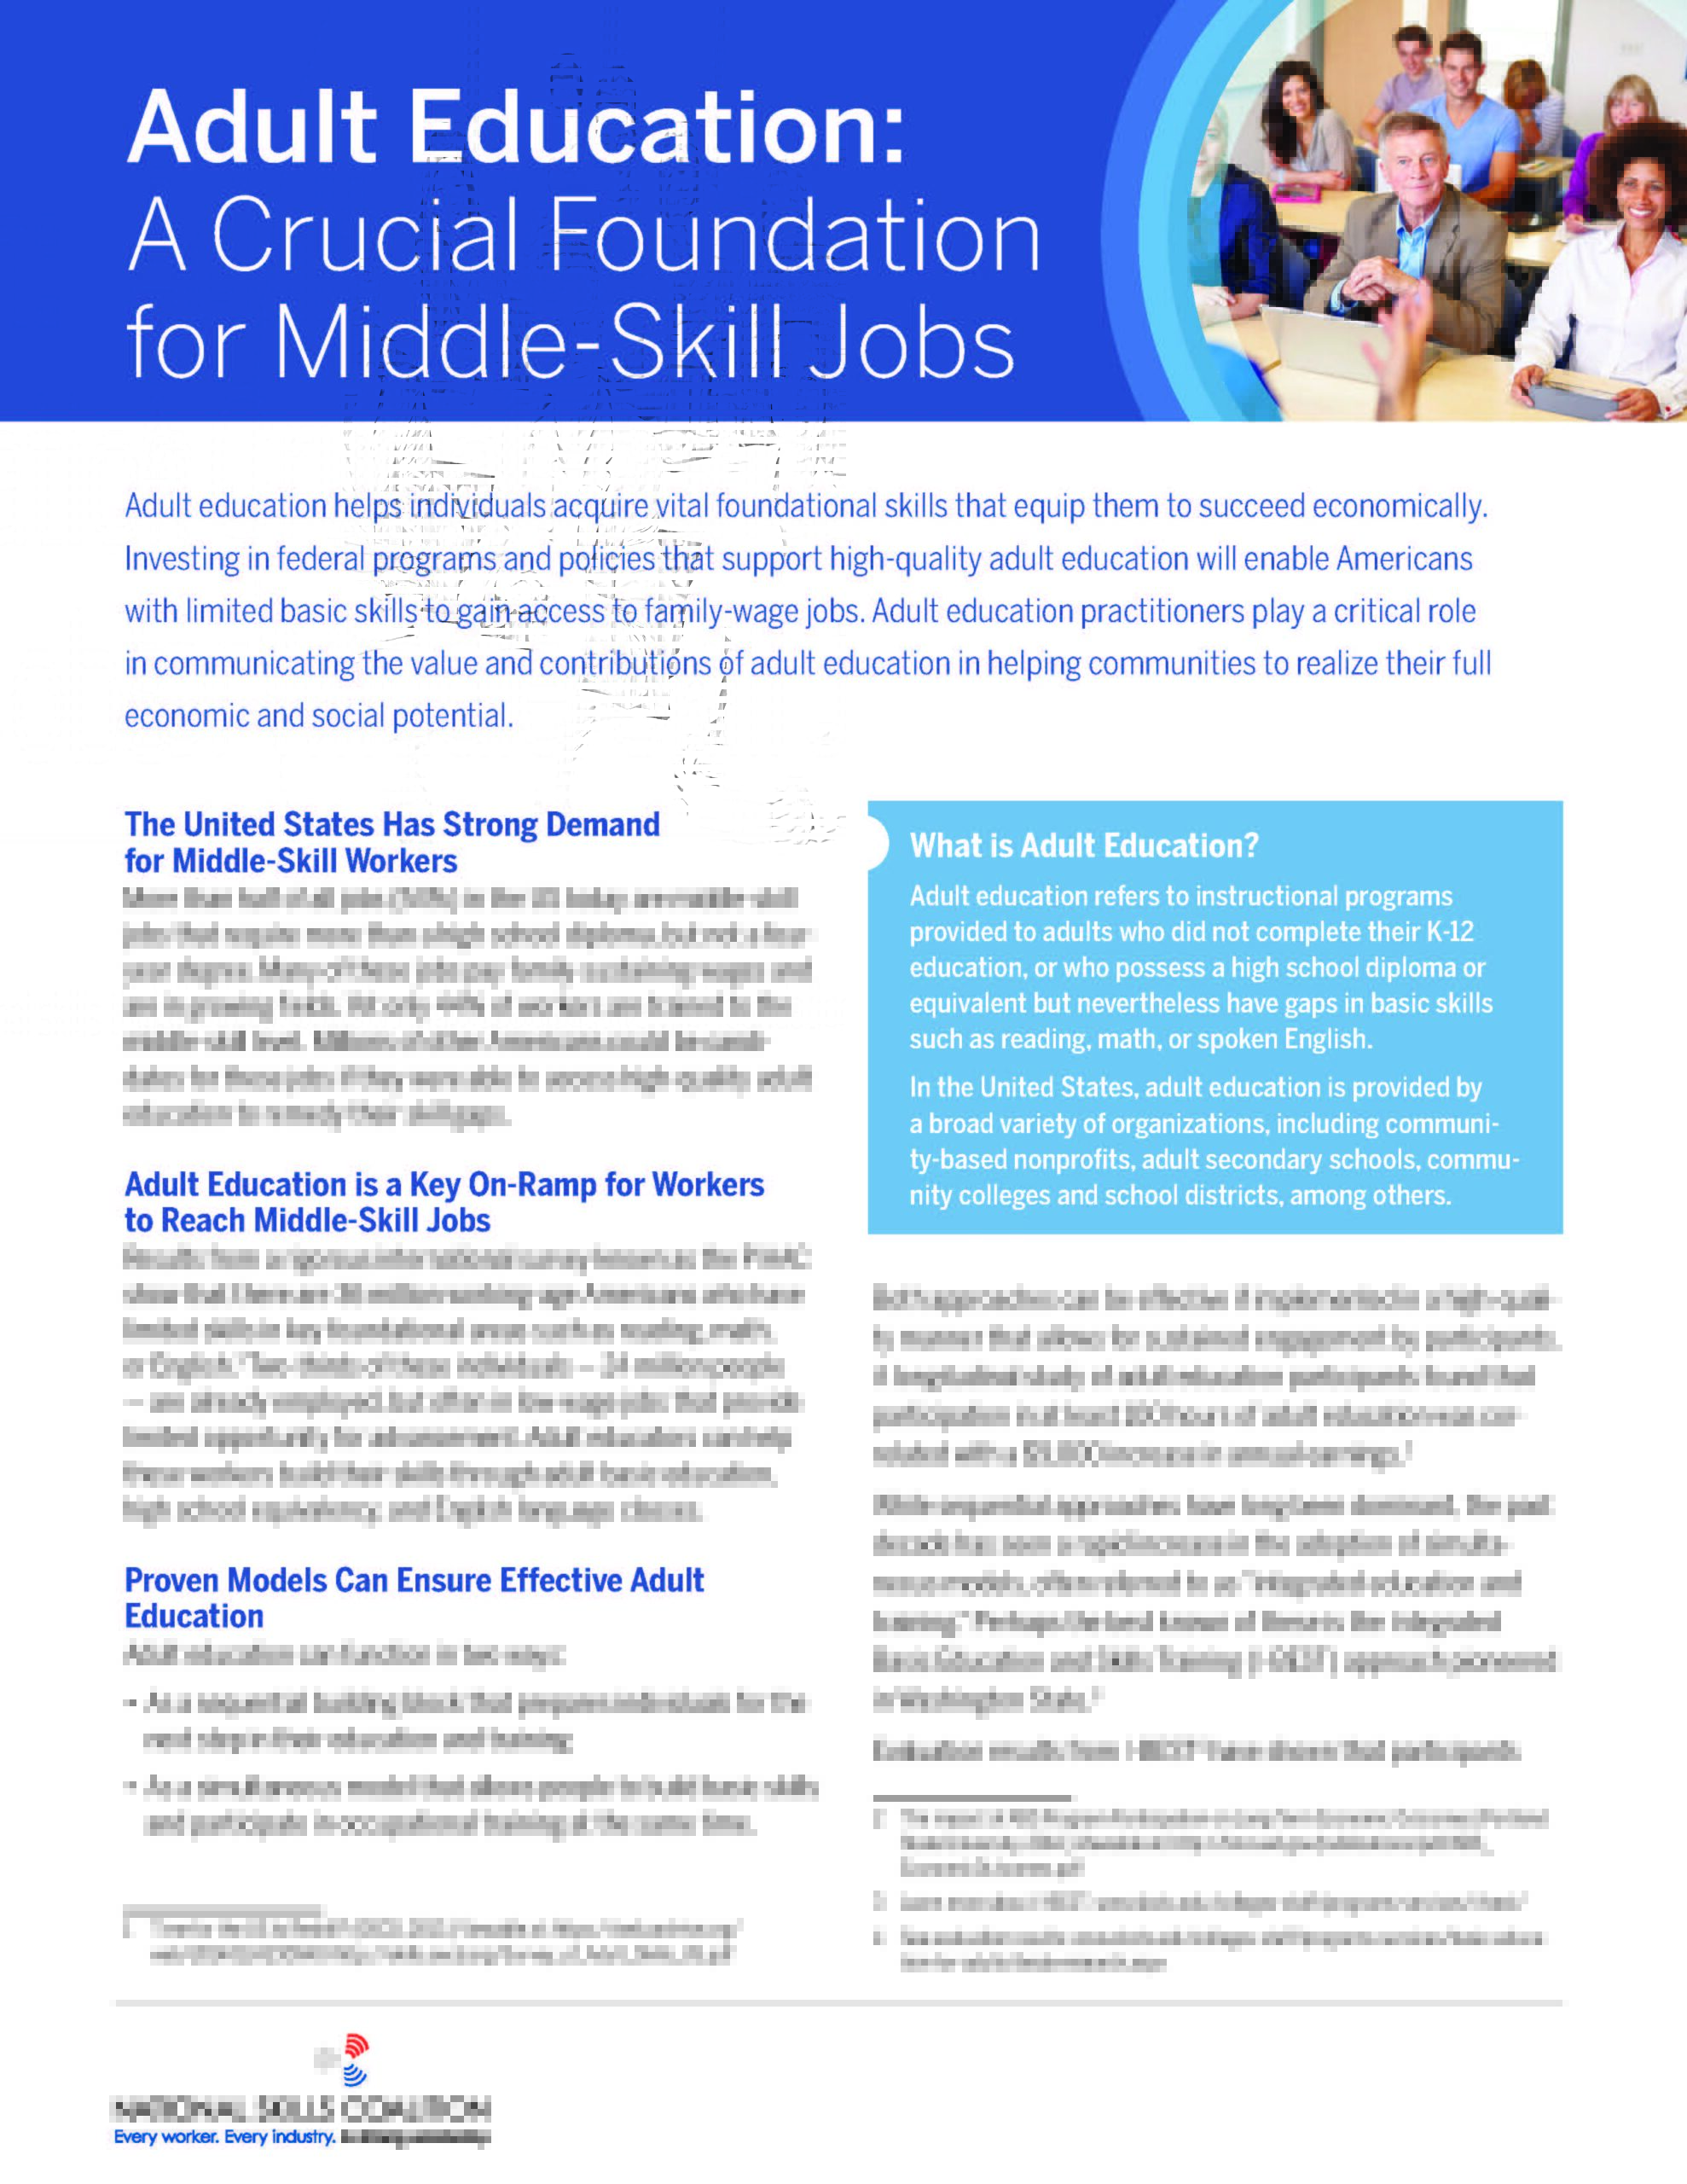 Celebrating #AEFLWeek with a New Fact Sheet on Adult Education & Middle-Skill Jobs